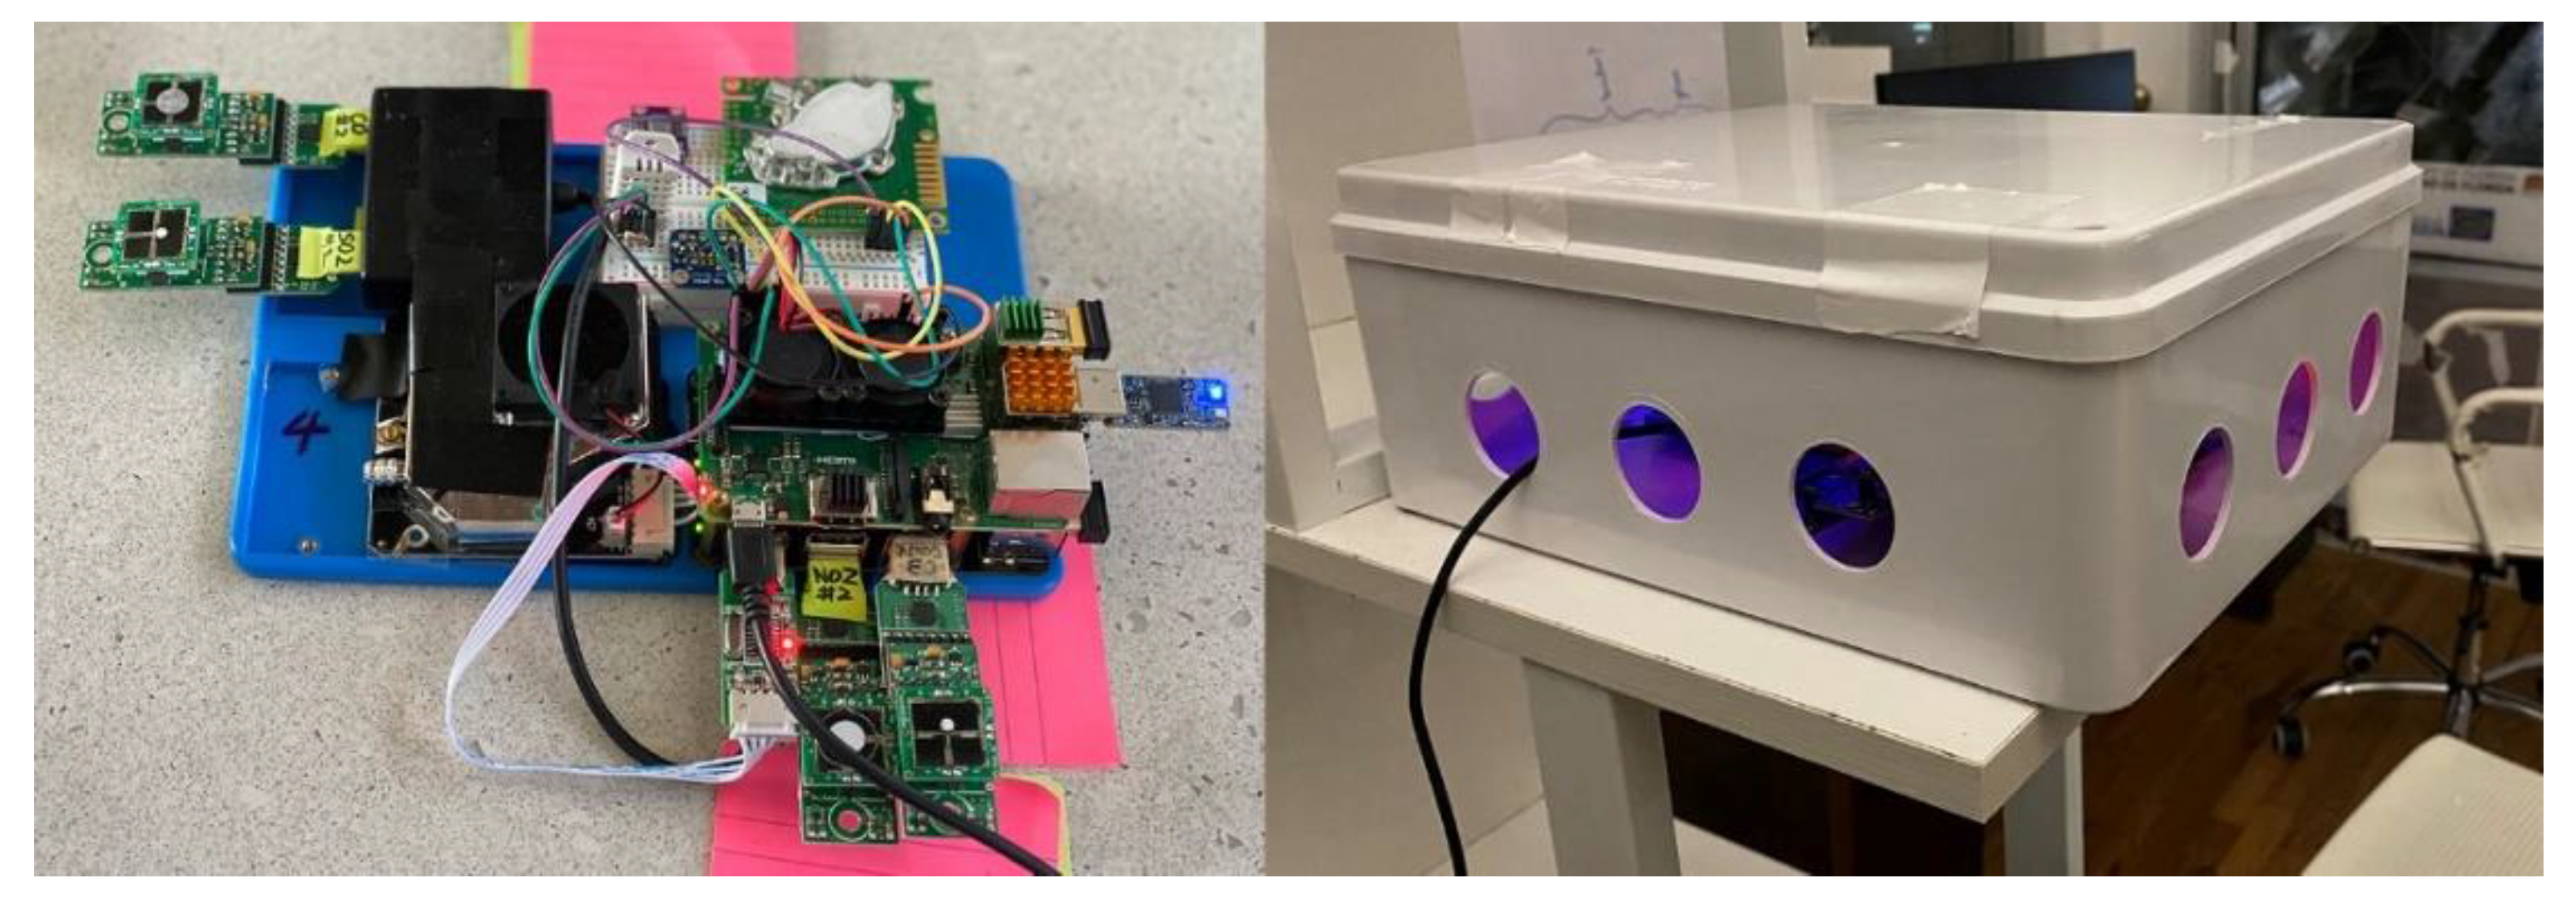 Sustainability | Free Full-Text | Low Cost, Multi-Pollutant Sensing System  Using Raspberry Pi for Indoor Air Quality Monitoring